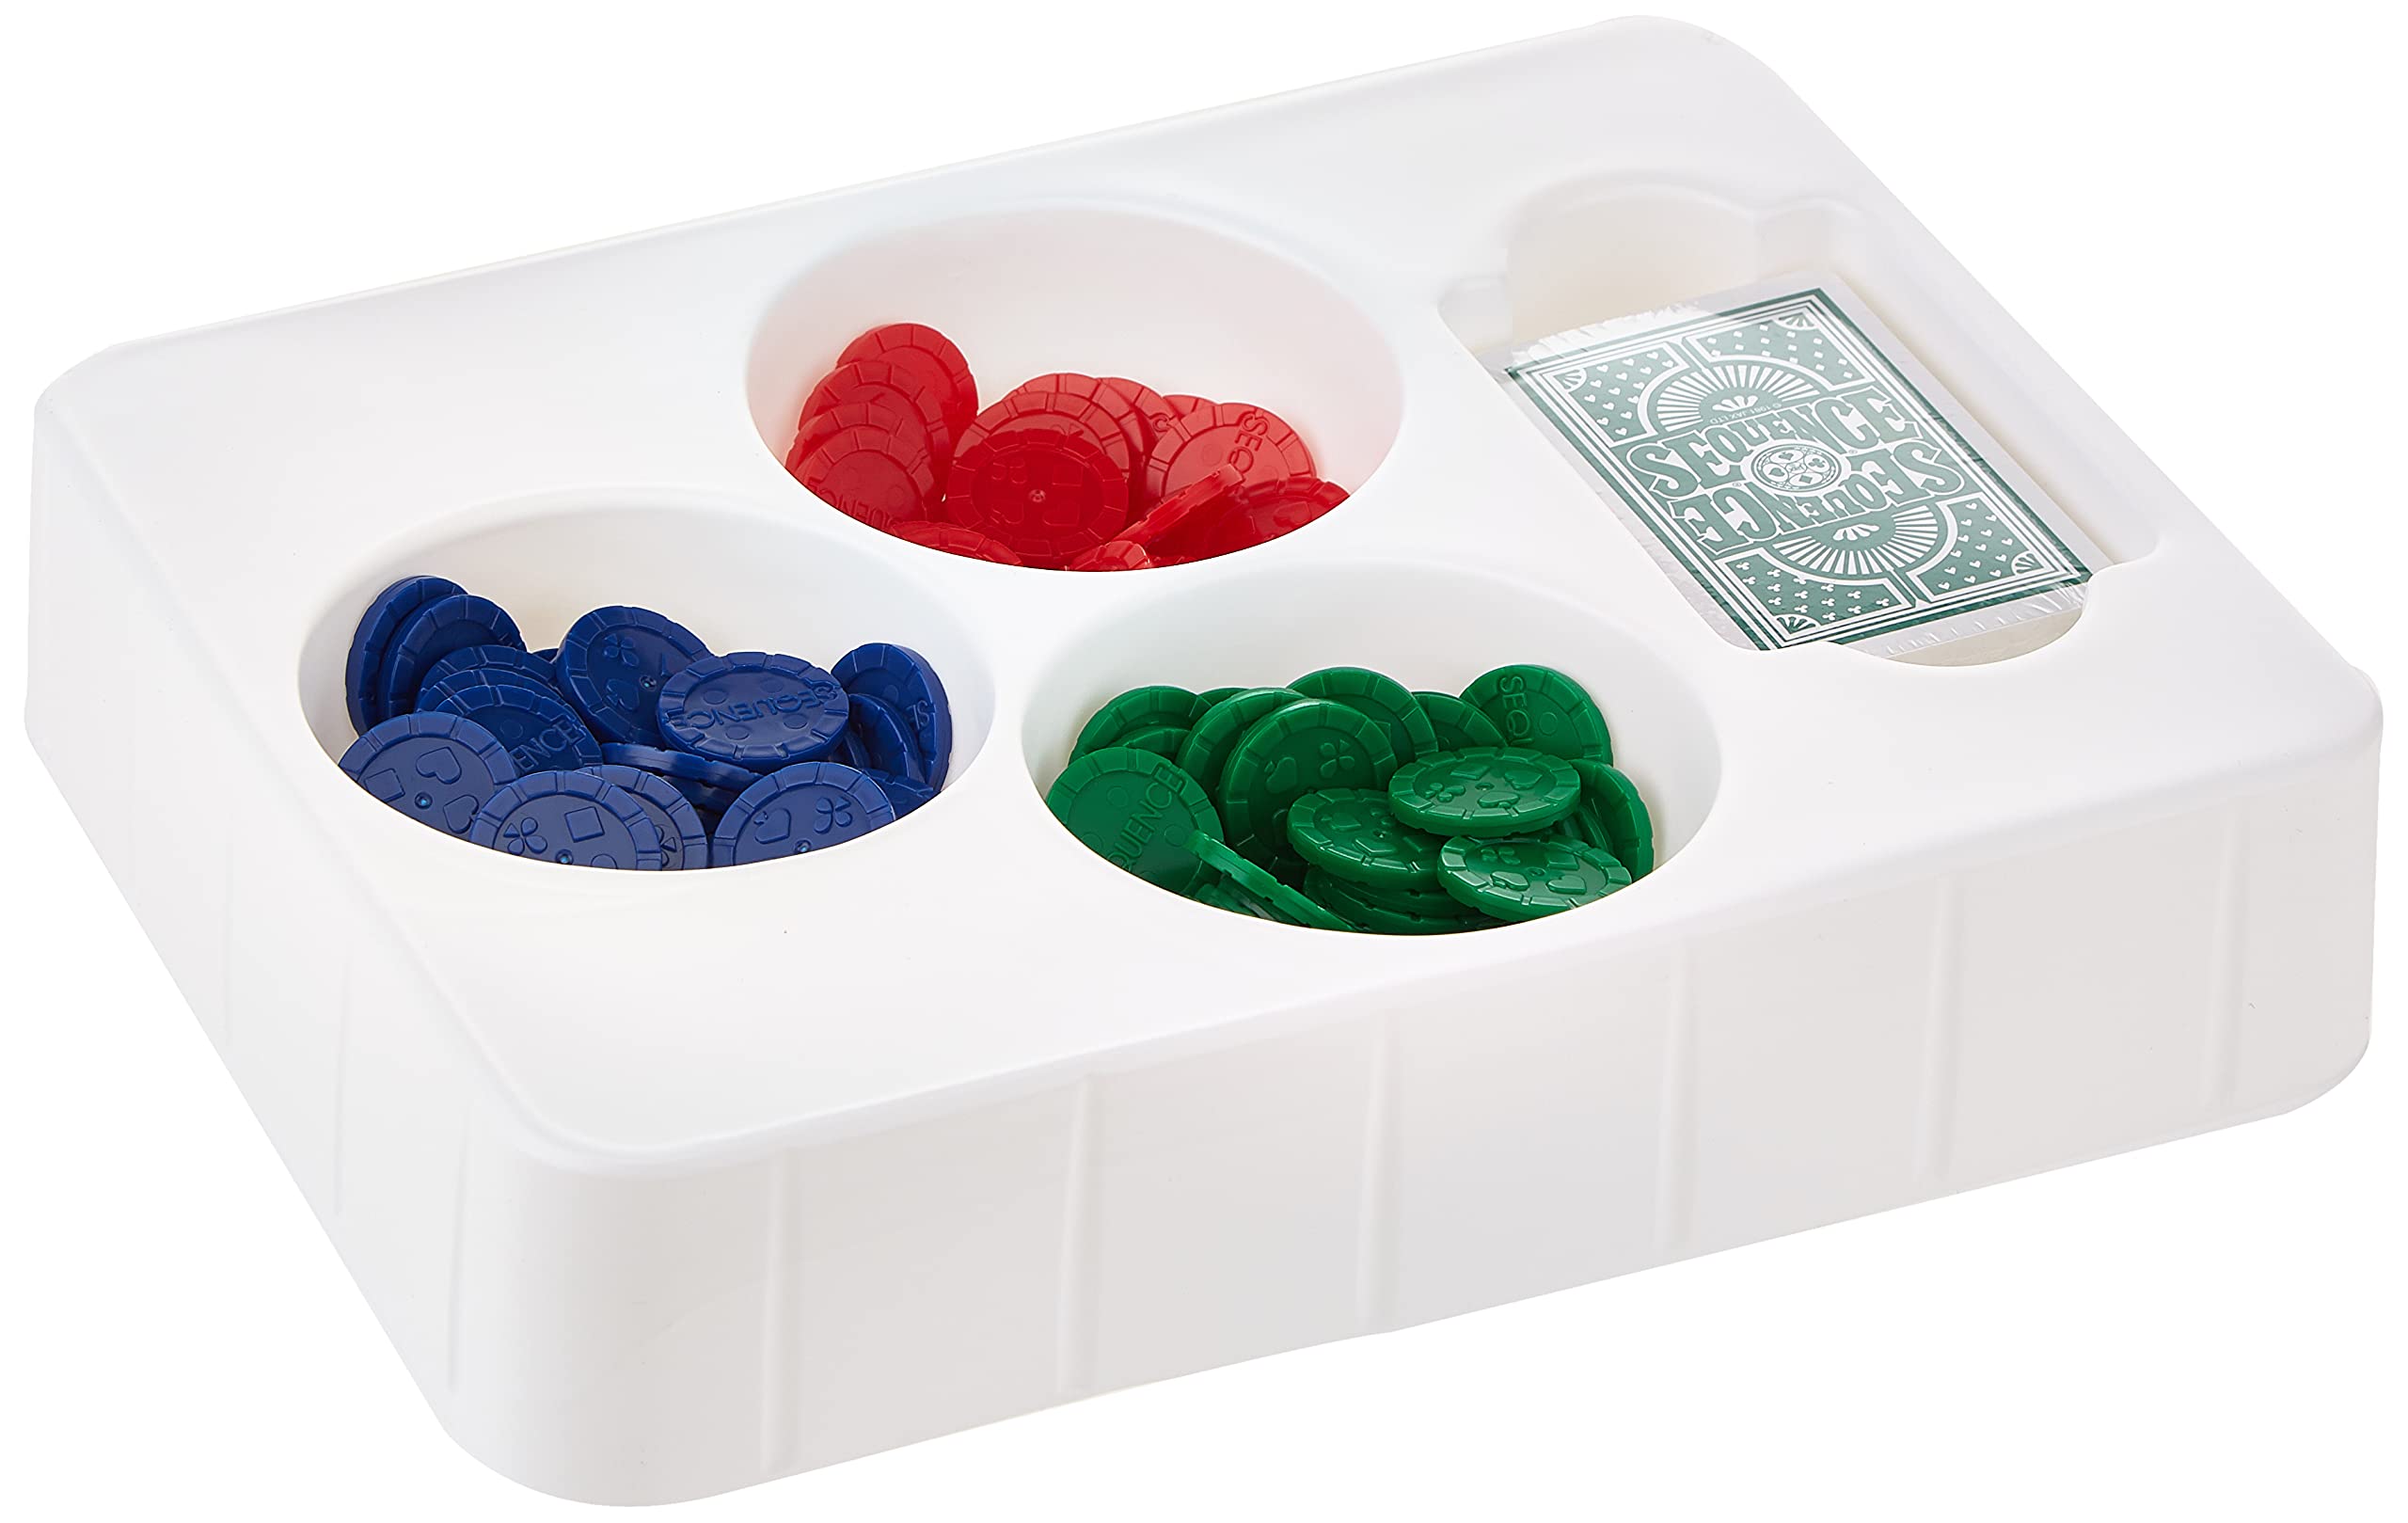 Jax SEQUENCE in a Tin - Original SEQUENCE Game with Folding Board, Cards and Chips Multi Color, 5